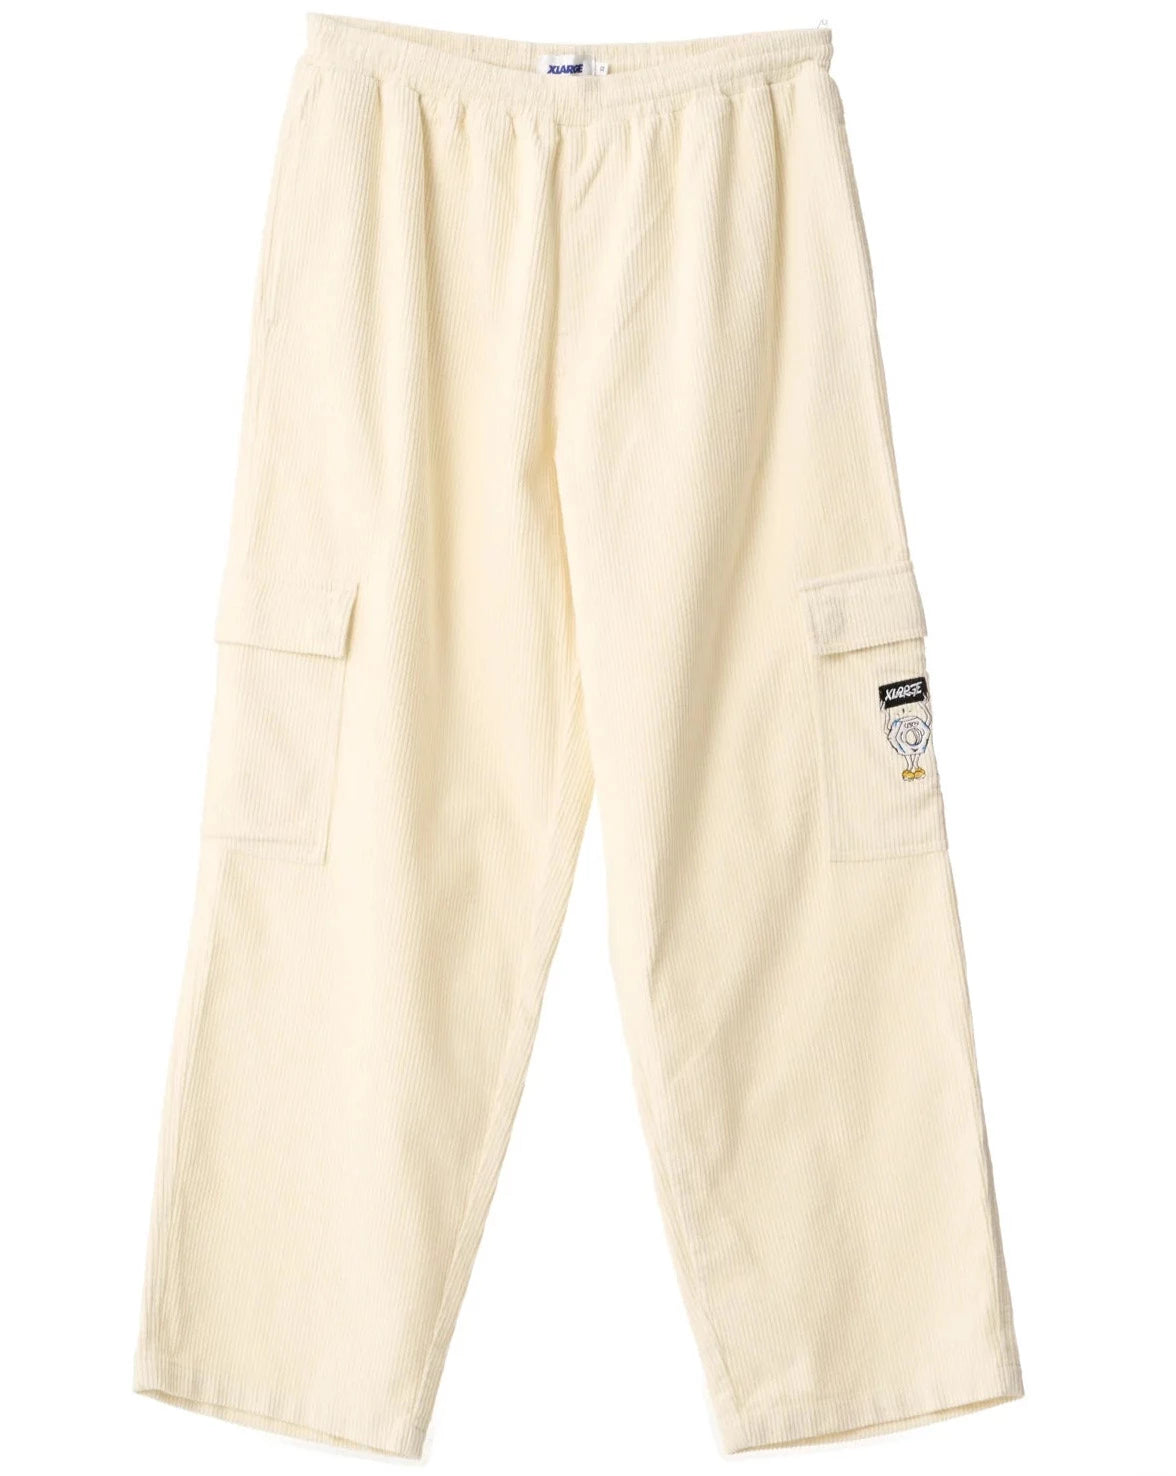 X-Large Cargo Wide Wale 91 Pant Off White